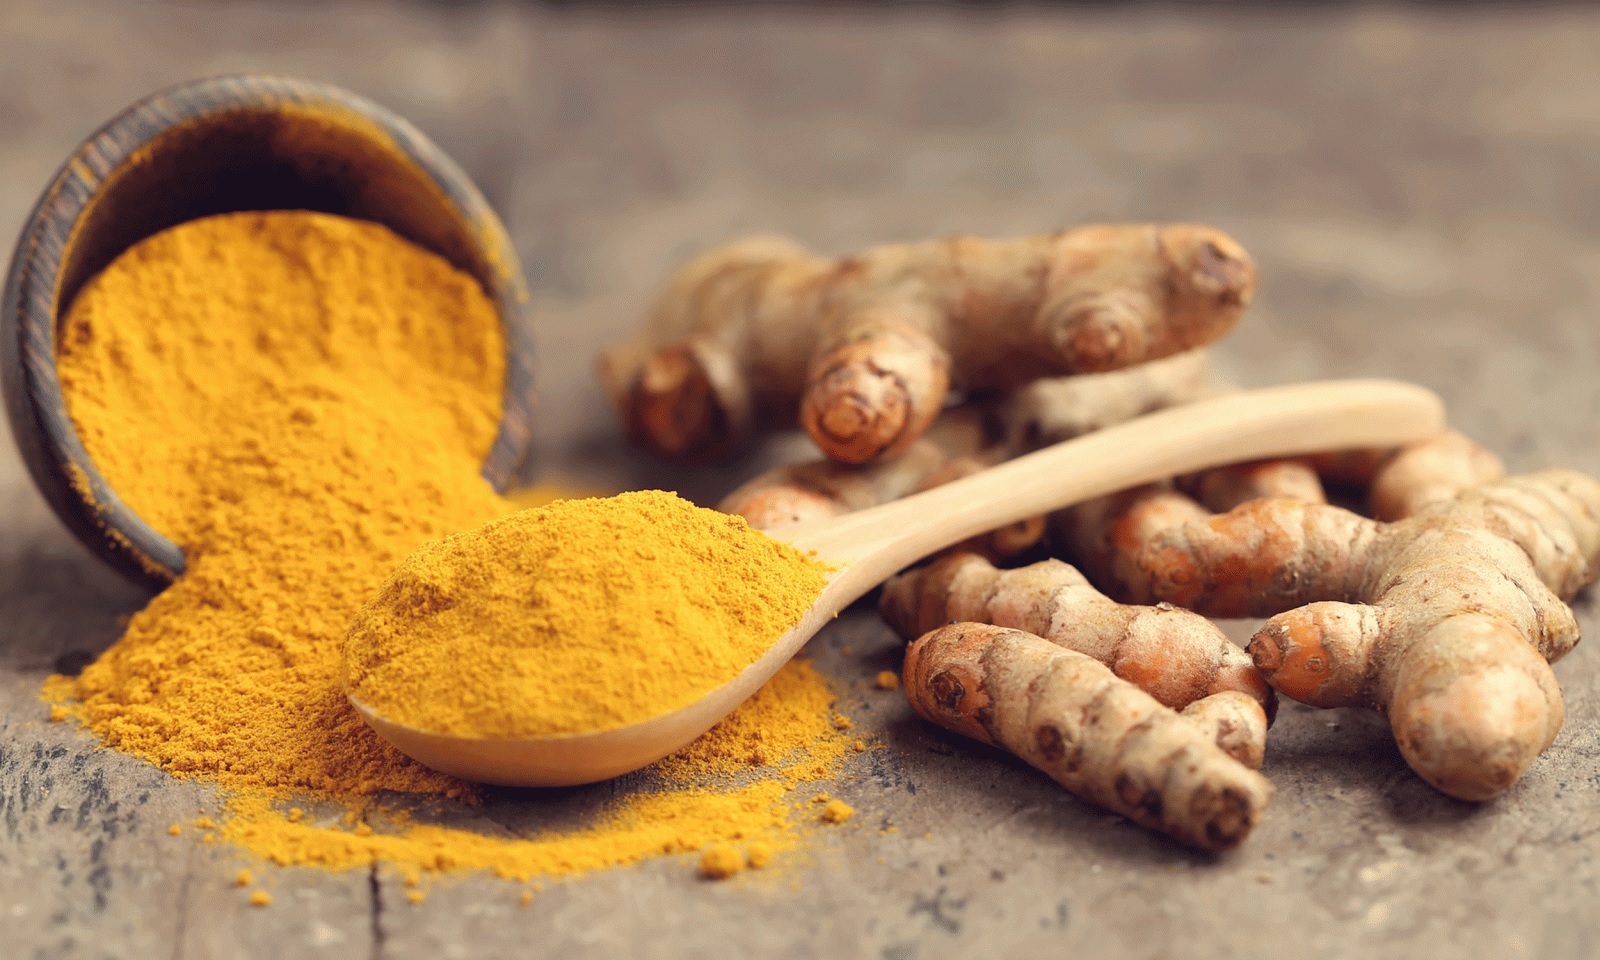 Turmeric a spice with power to help control inflammation and manage pain